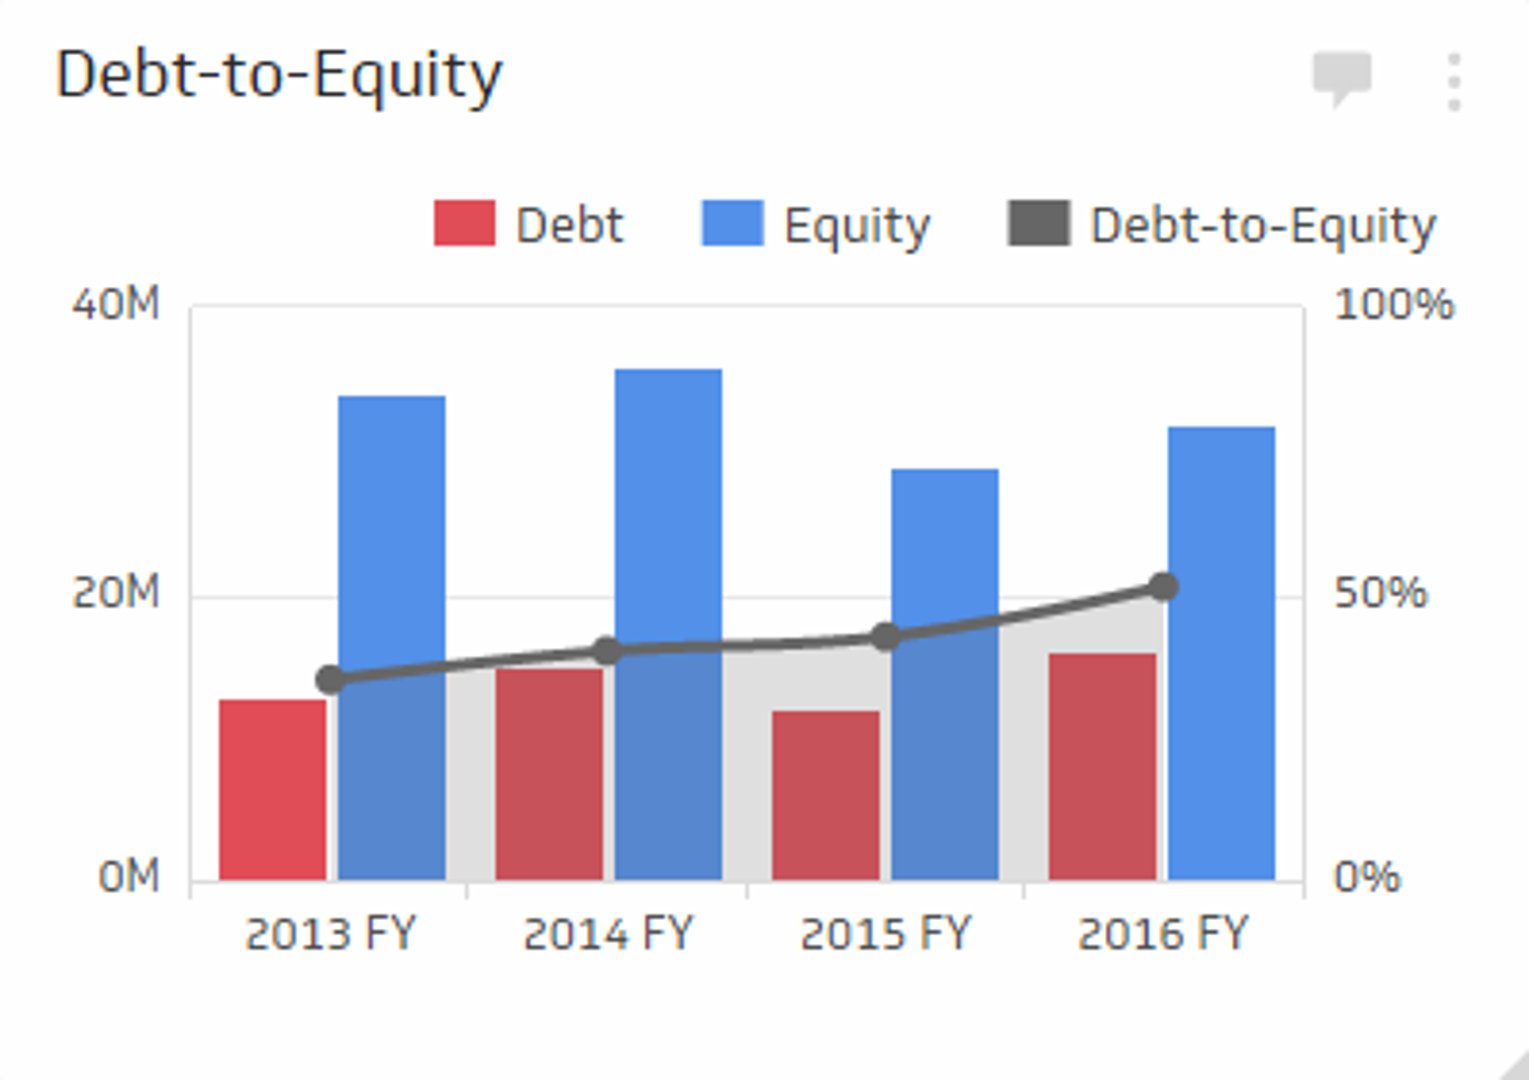 Related KPI Examples - Debt to Equity Ratio Metric